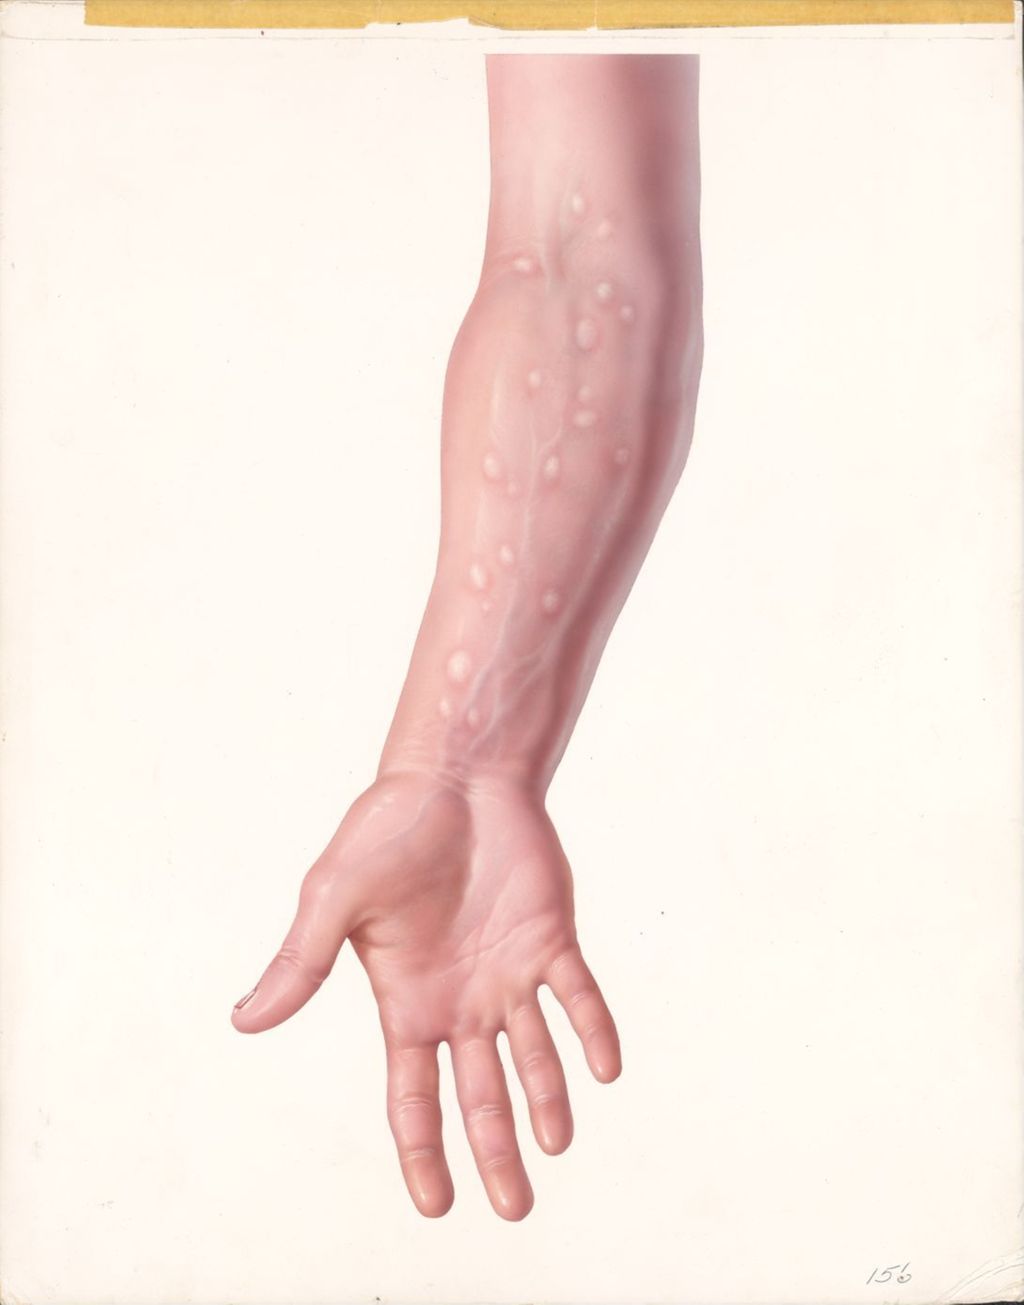 Artwork of arm with veins showing and unknown lumps on arm